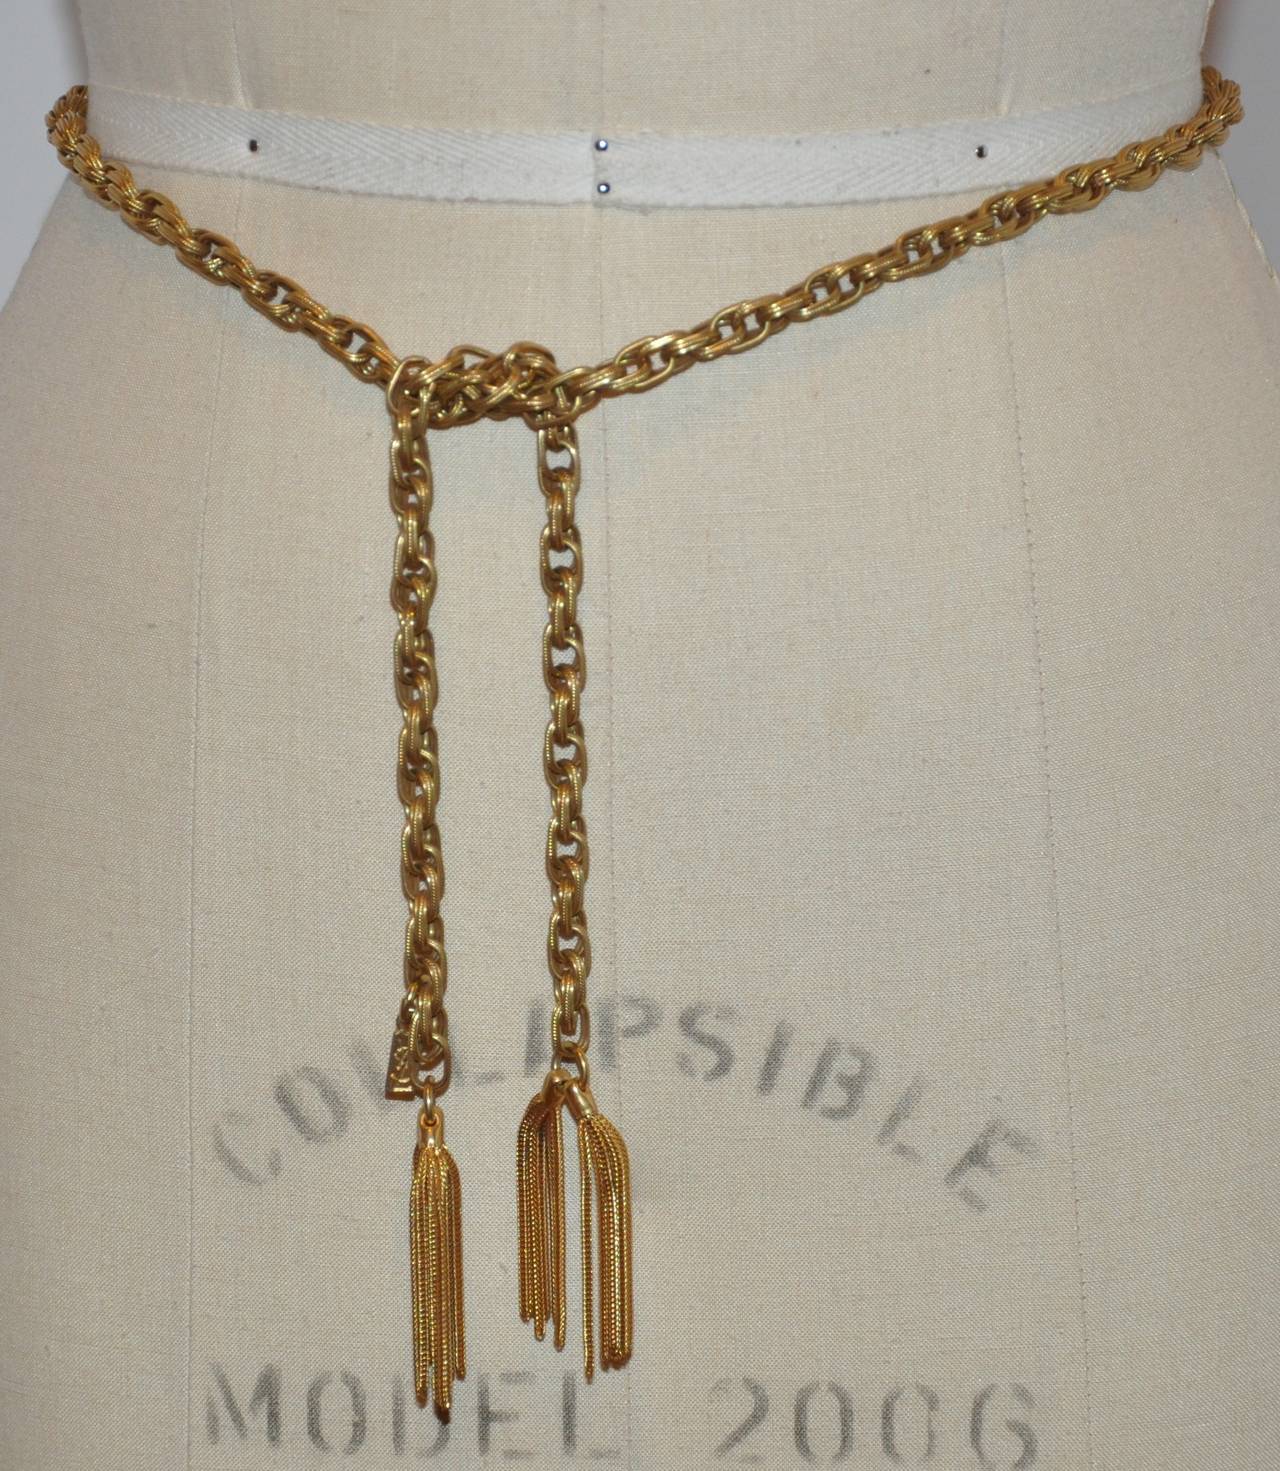 Yves Saint Laurent signature gold hardware link chain belt is accented with 2